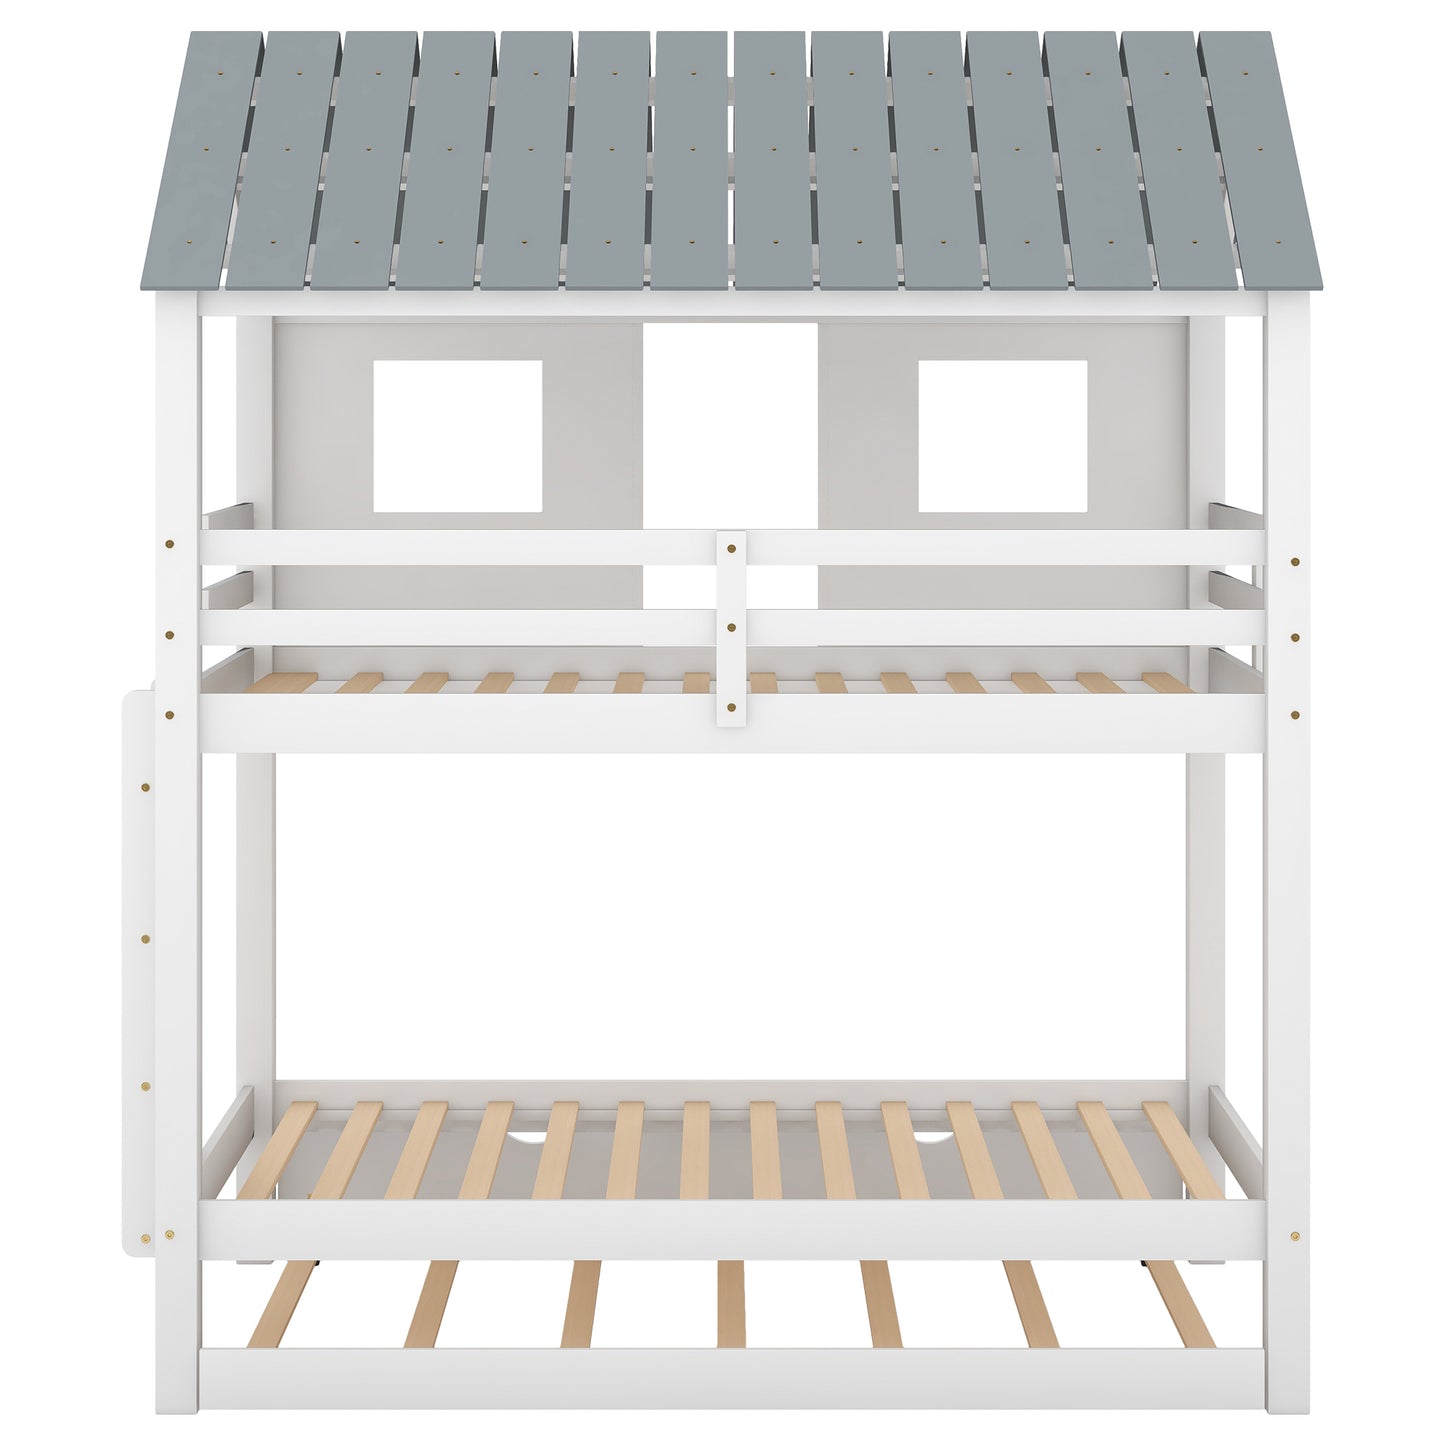 House Bunk Bed with Trundle,Roof and Windows,White